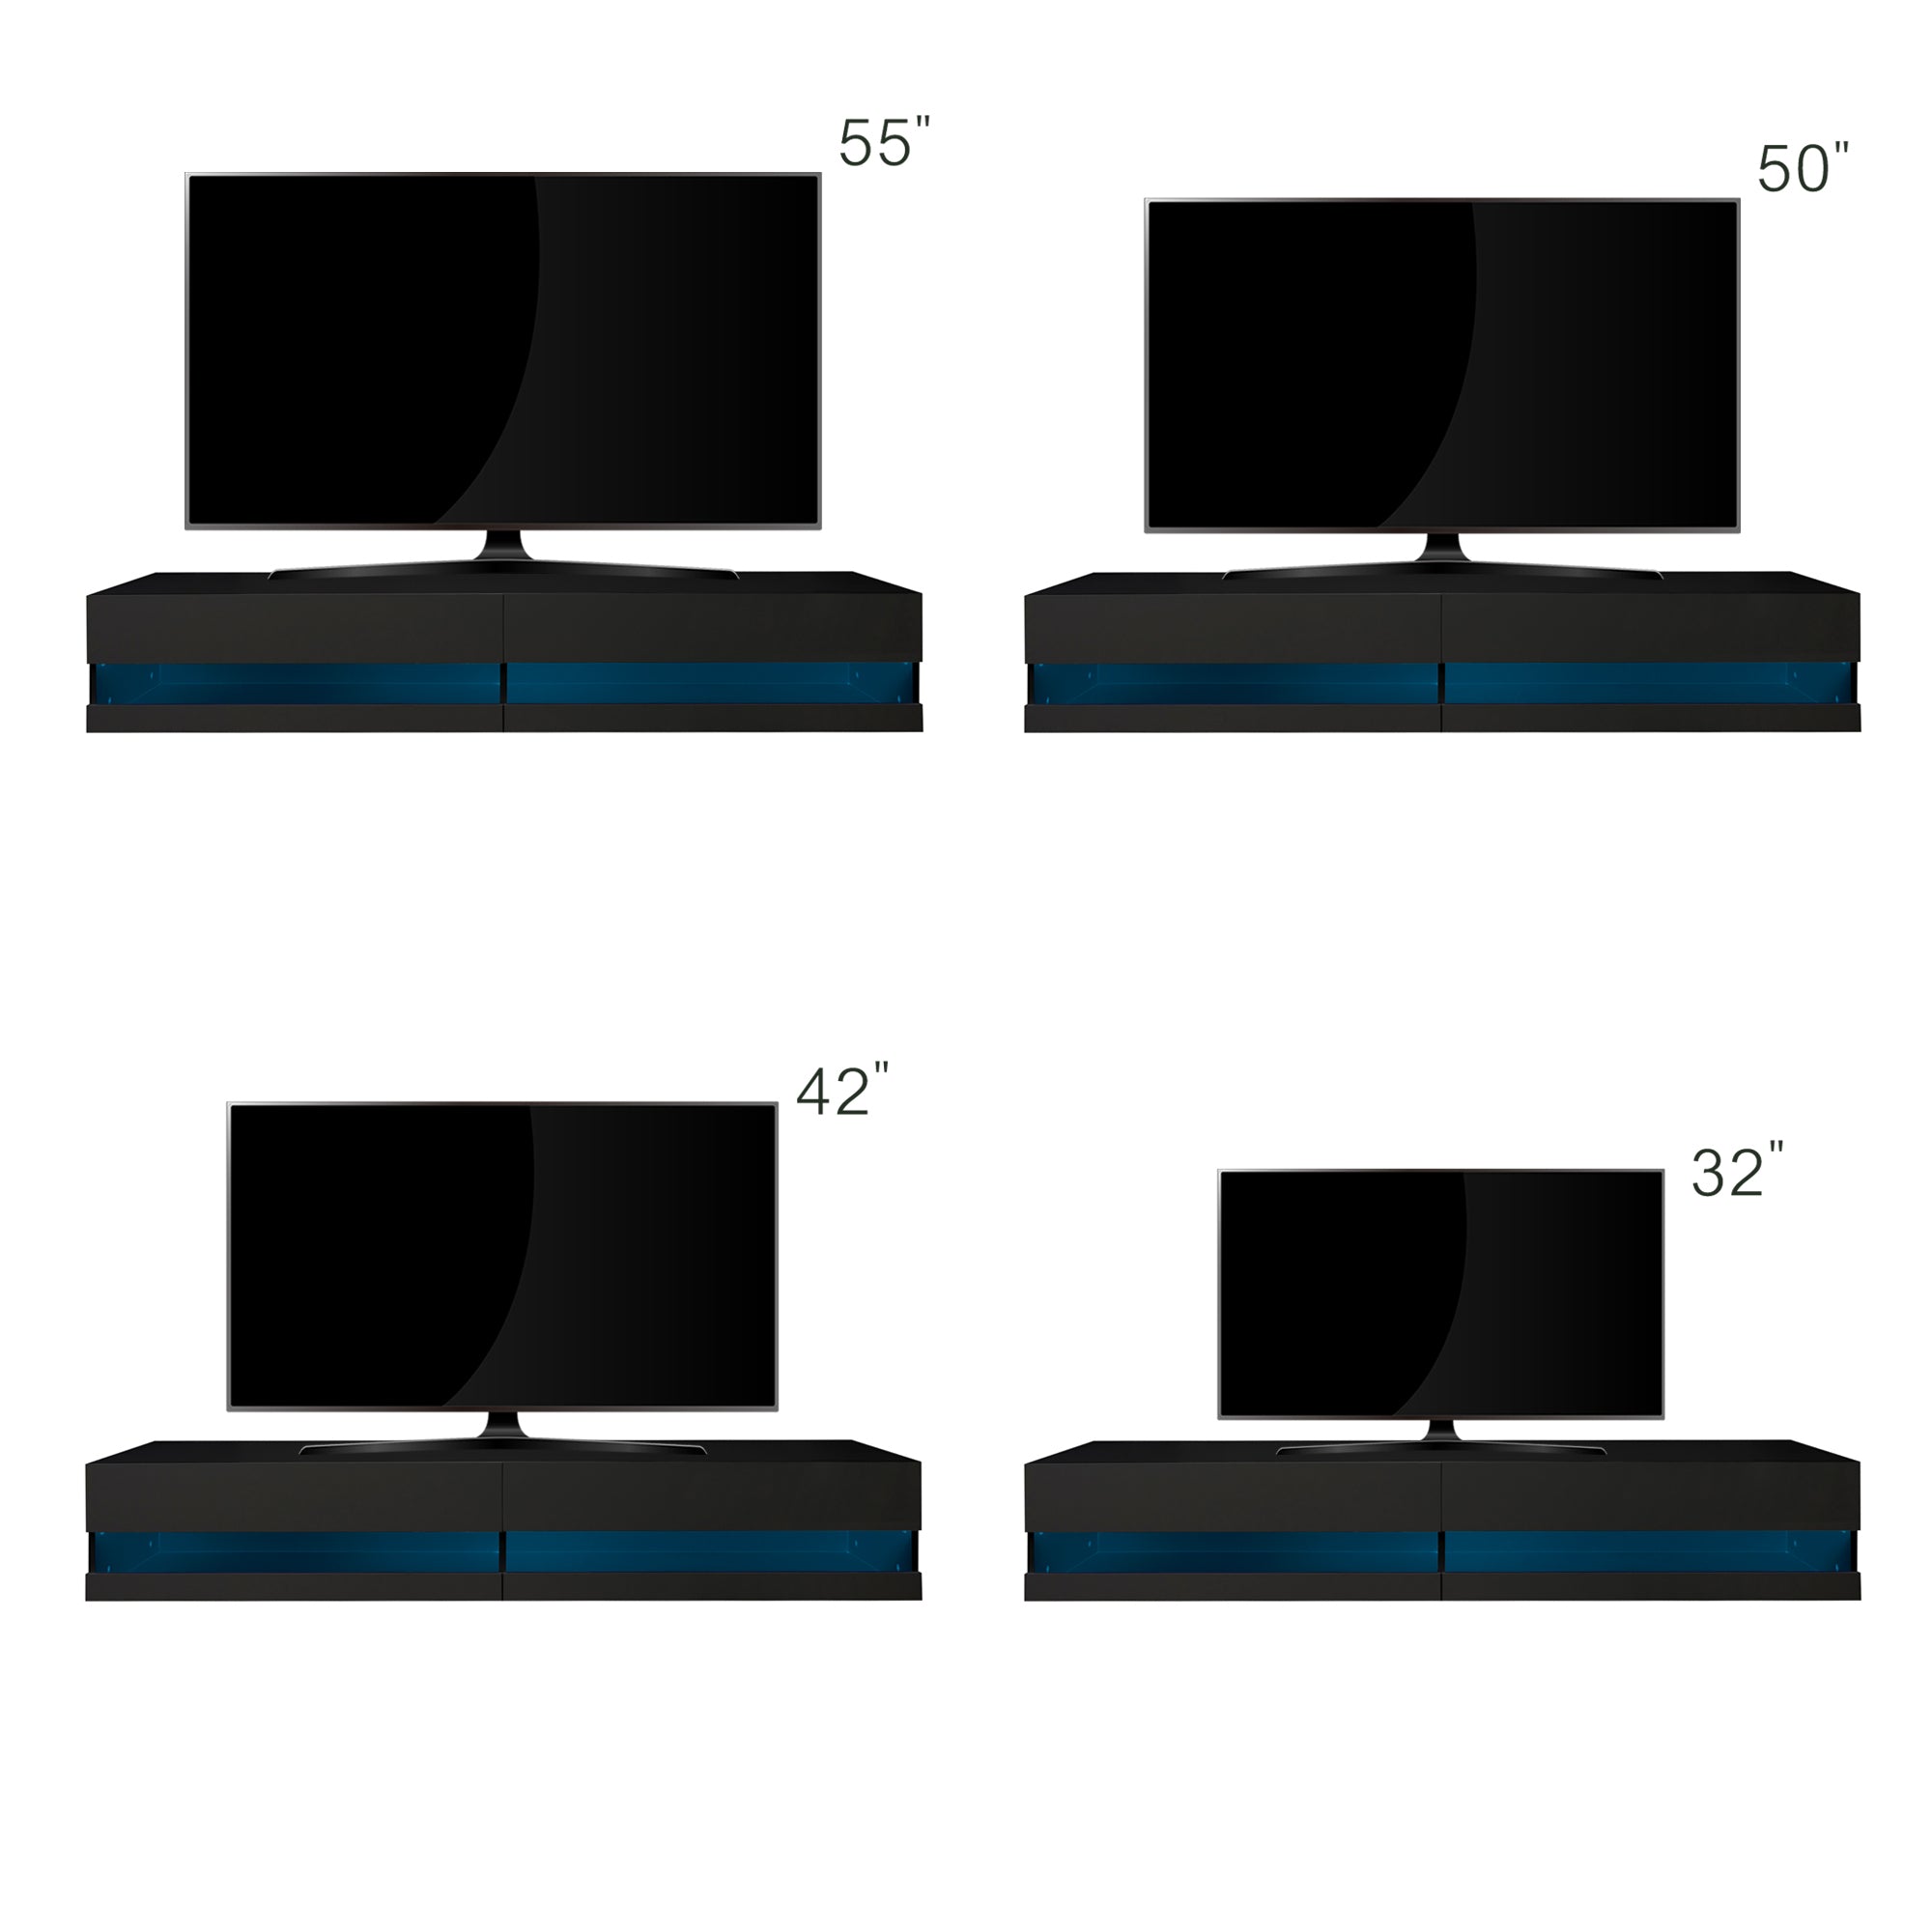 180 Wall Mounted Floating 80 Inch TV Stand with Color LED (Black)